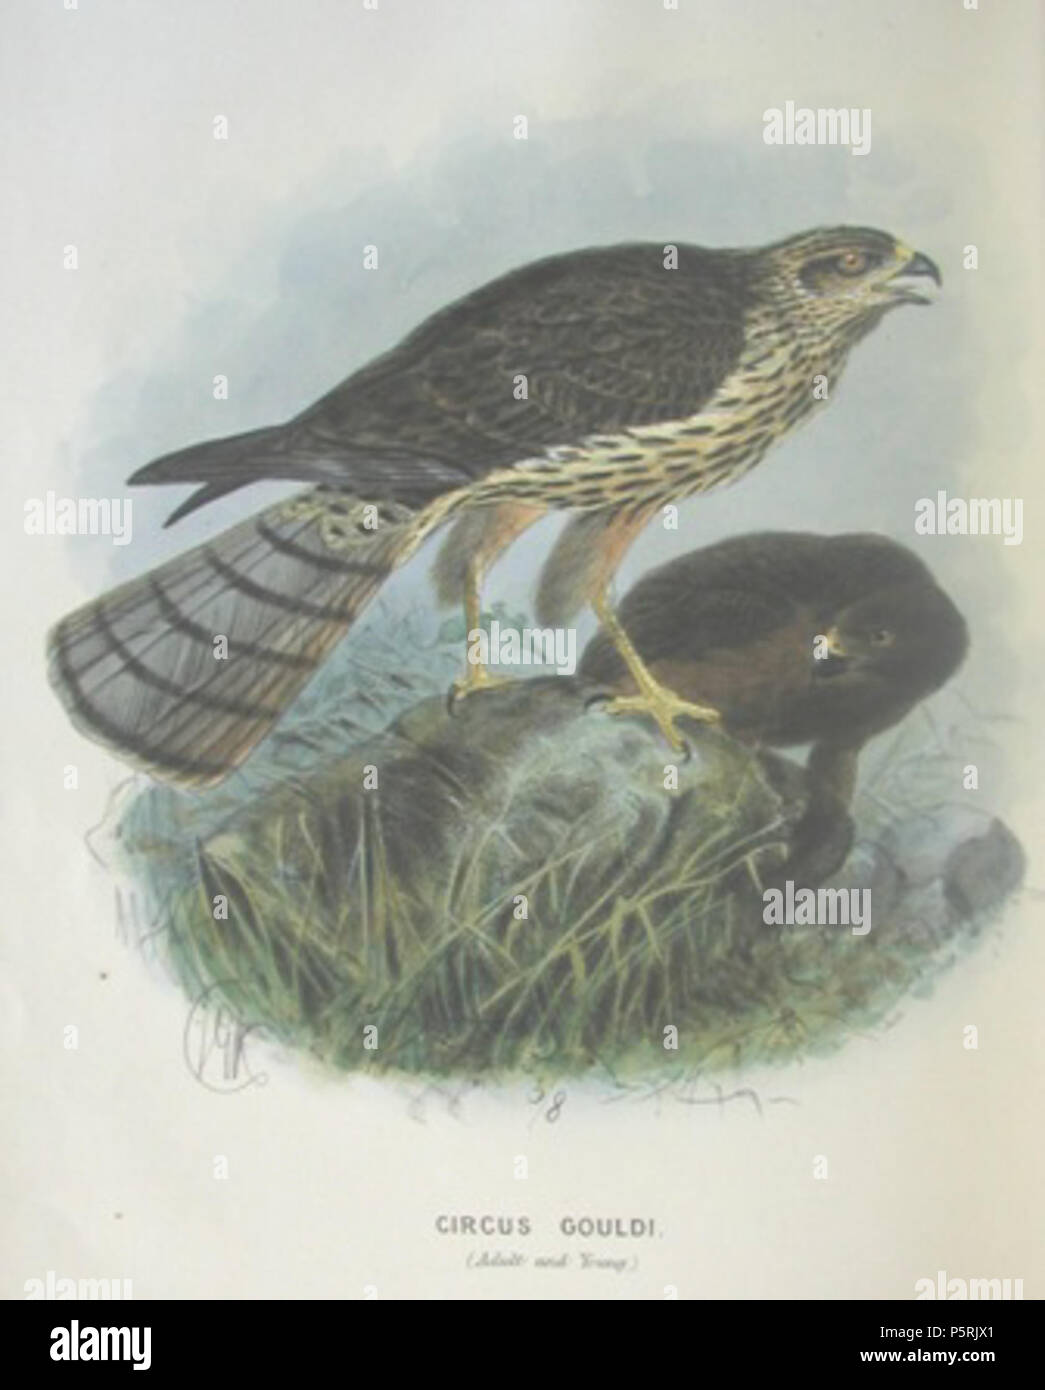 N/A. English: Title “Circus gouldi (Adult and Young)”. Juvenile (right) and adult Swamp Harrier (Circus approximans gouldi), subspecies of New Zealand. Originally published in: Walter Lawry Buller: Birds of New Zealand, 1873. Deutsch: Titel: „Circus gouldi (Adult and Young)“. Juvenile (rechts) und adulte Sumpfweihe (Circus approximans gouldi), neuseeländische Unterart. Ursprünglich aus: Walter Lawry Buller: Birds of New Zealand, 1873. 1873.   John Gerrard Keulemans  (1842–1912)      Alternative names Johannes Gerardus Keulemans; J. G. Keulemans  Description Dutch ornithologist and artist  Date Stock Photo